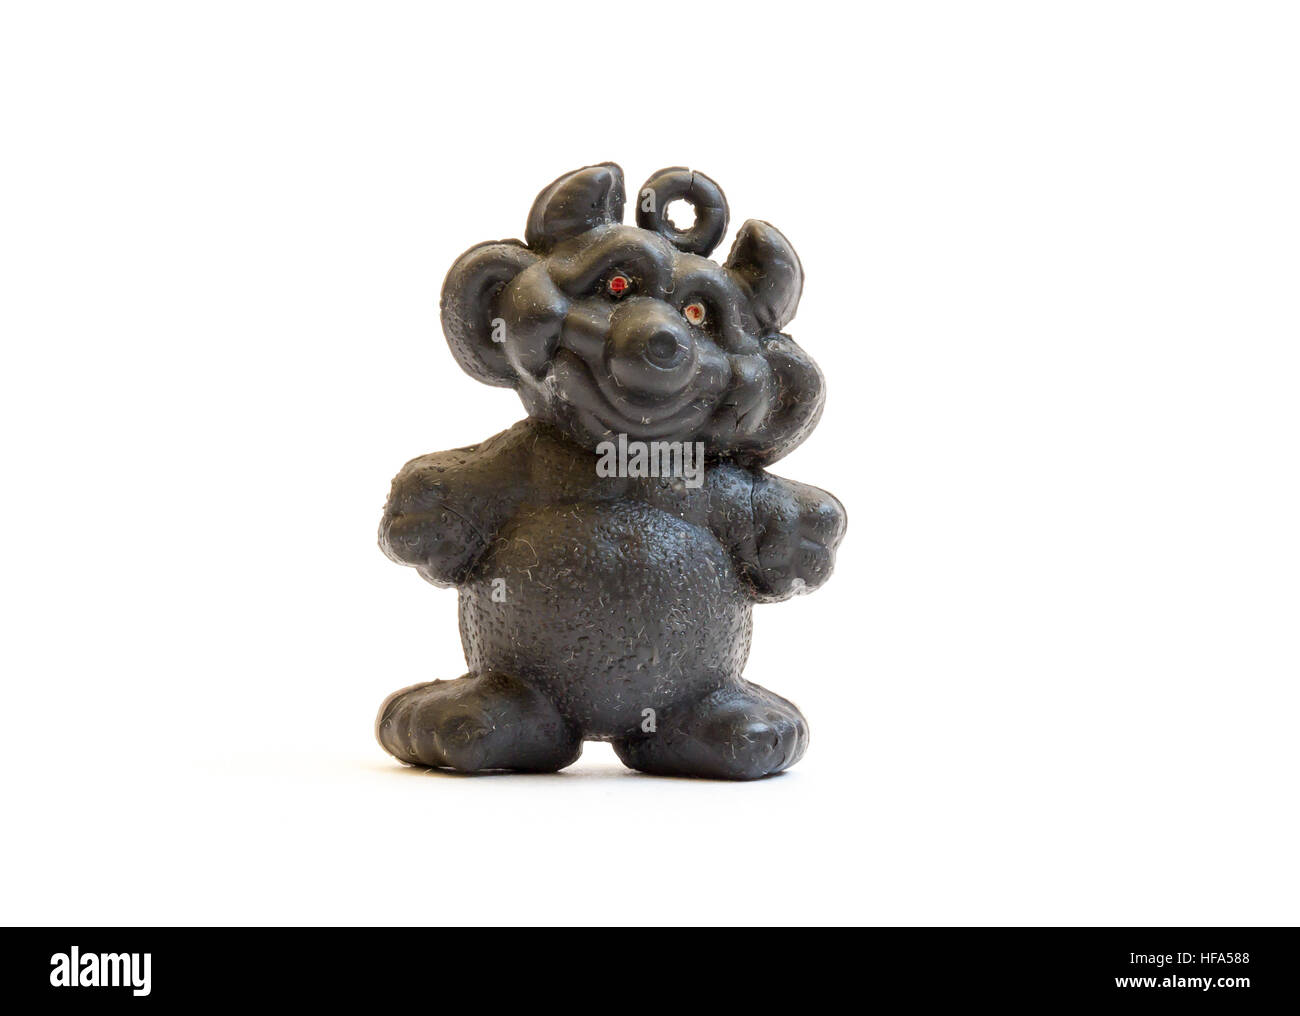 The Miniature isolated toy bear. Stock Photo